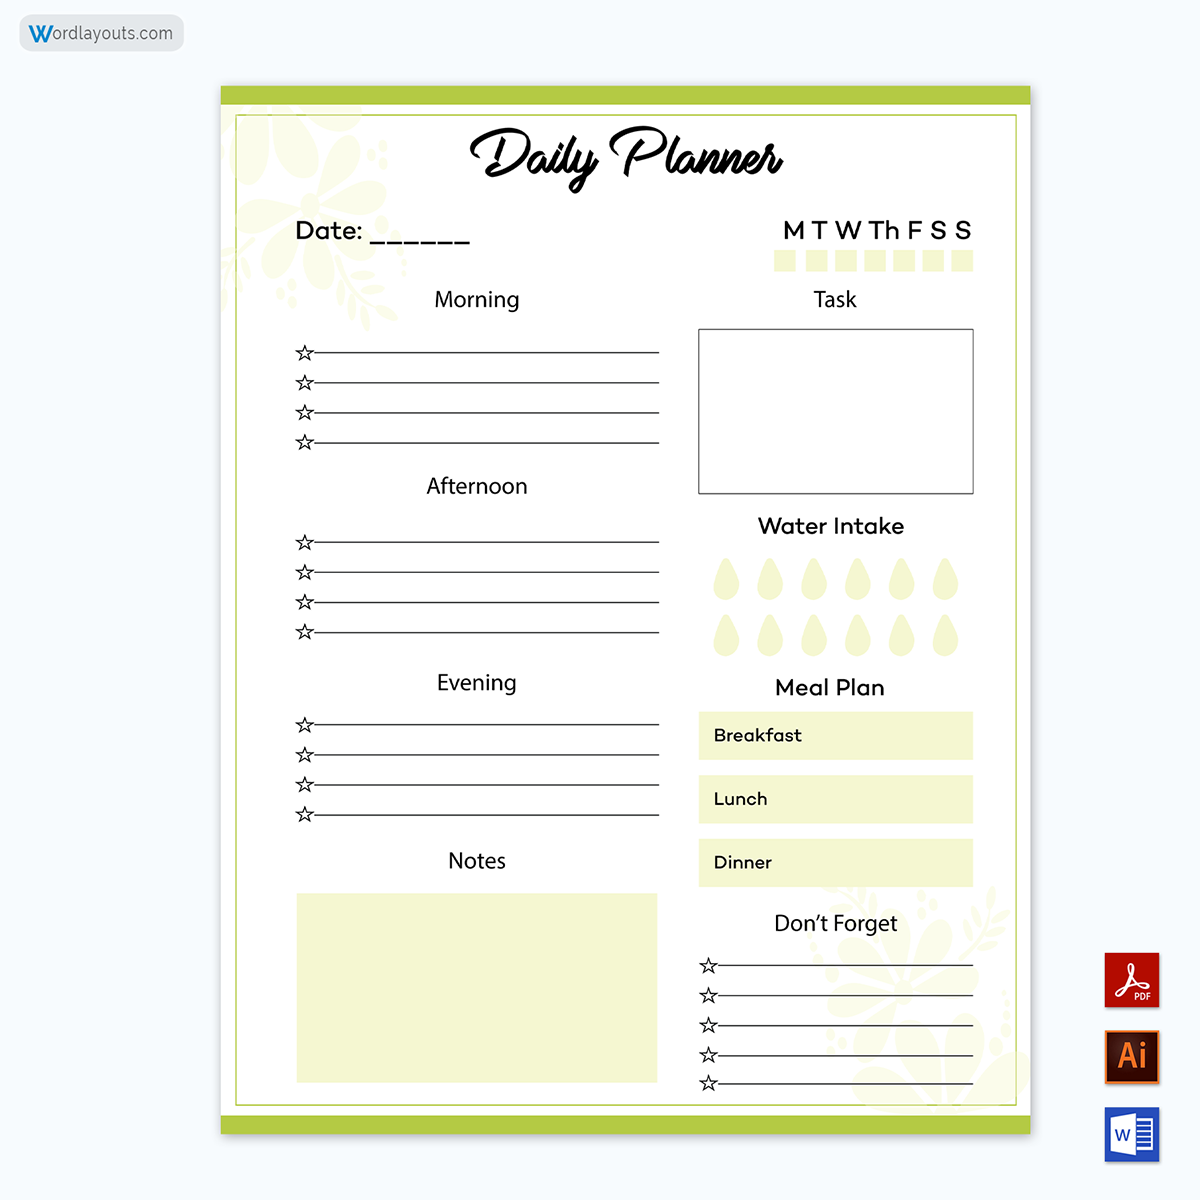 Daily-Planner-Template-8669ndnjp-06-23-p06